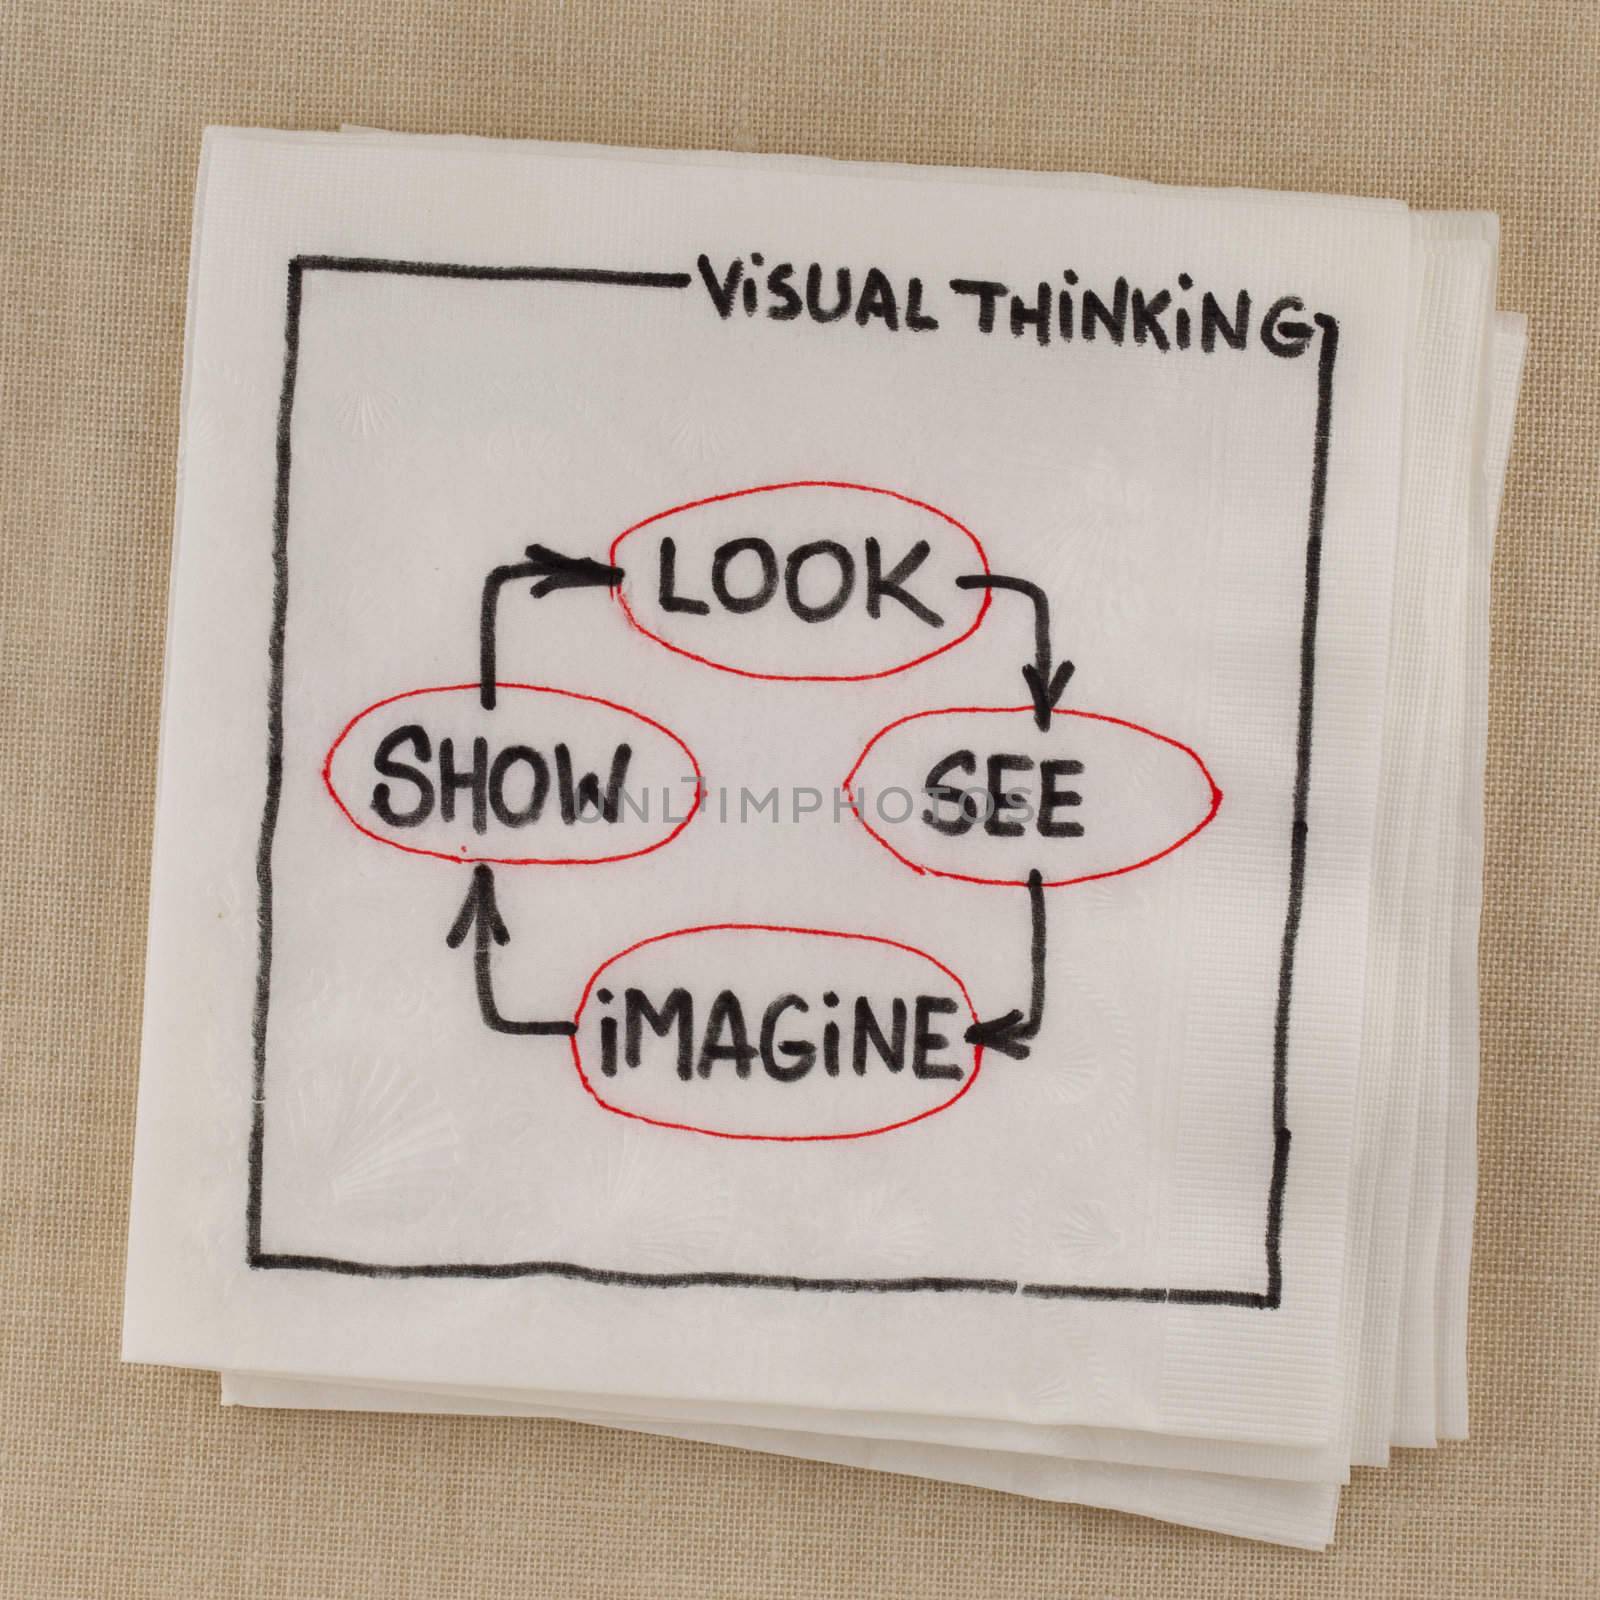 look, see, imagine, show, -  visual thinking concept - napkin sketch